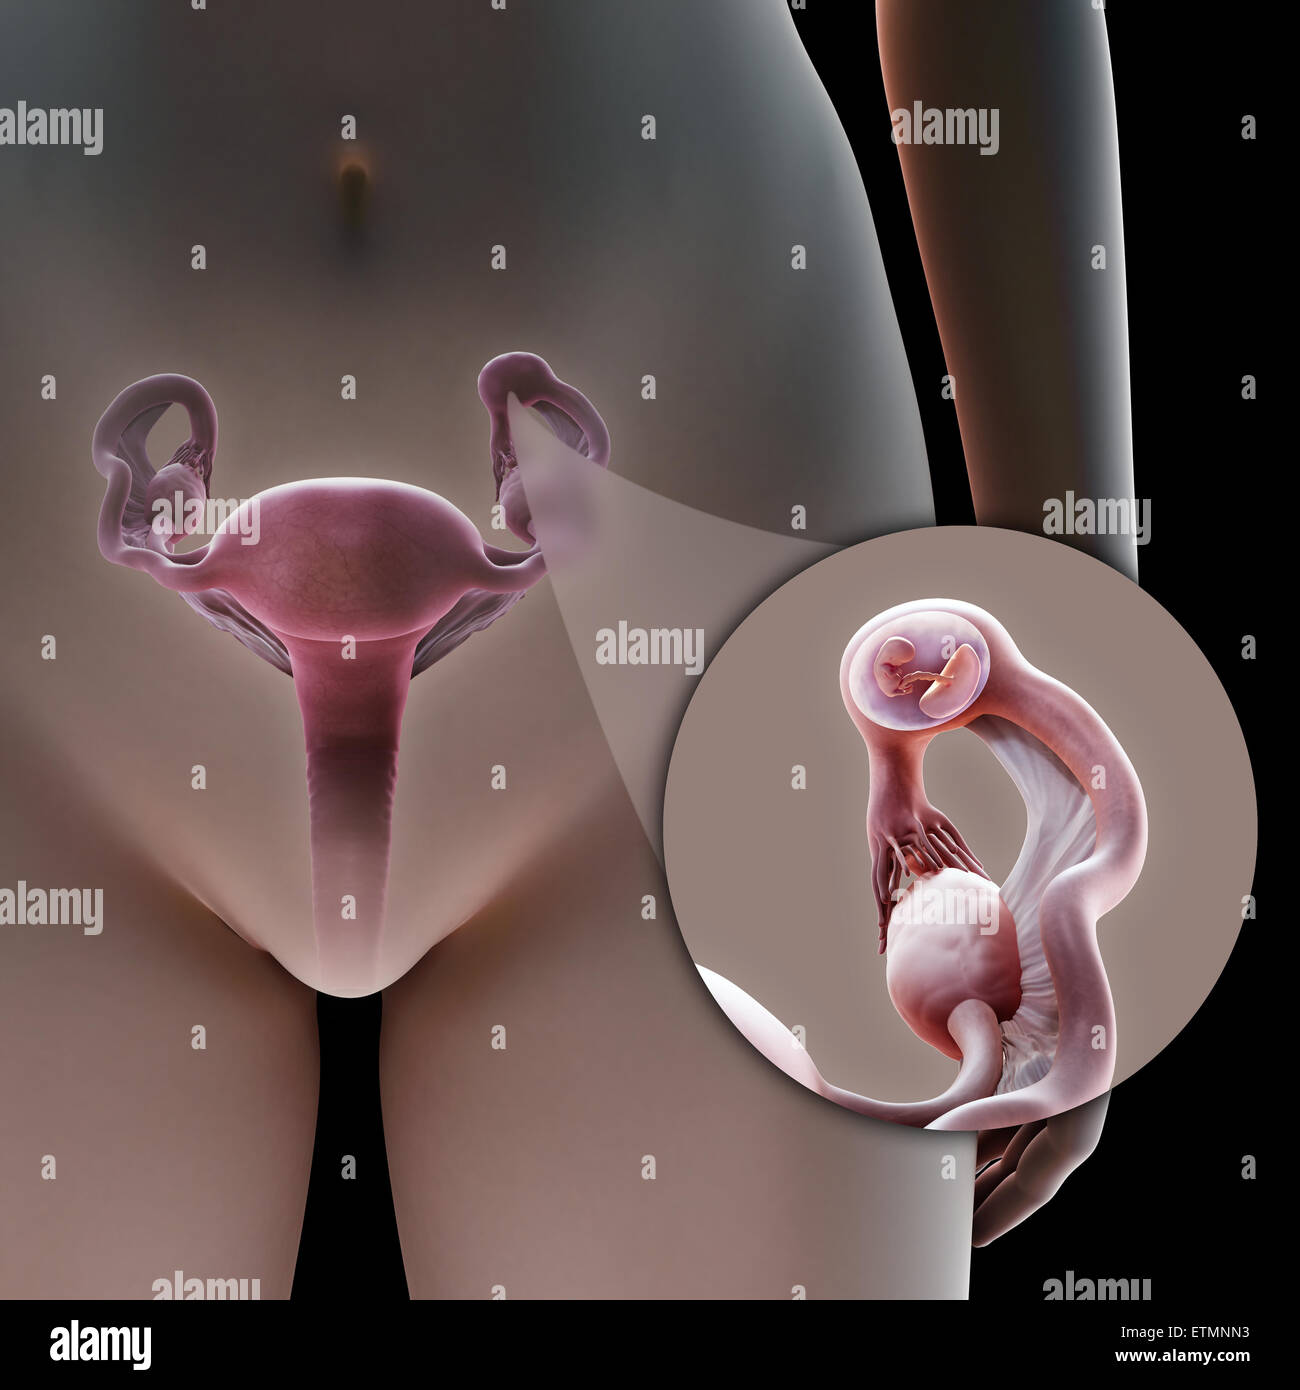 Illustration of the female reproduction system during an ectopic pregnancy location in the ampulla section of the Fallopian tube, a zoomed out section shows the embryo. Stock Photo